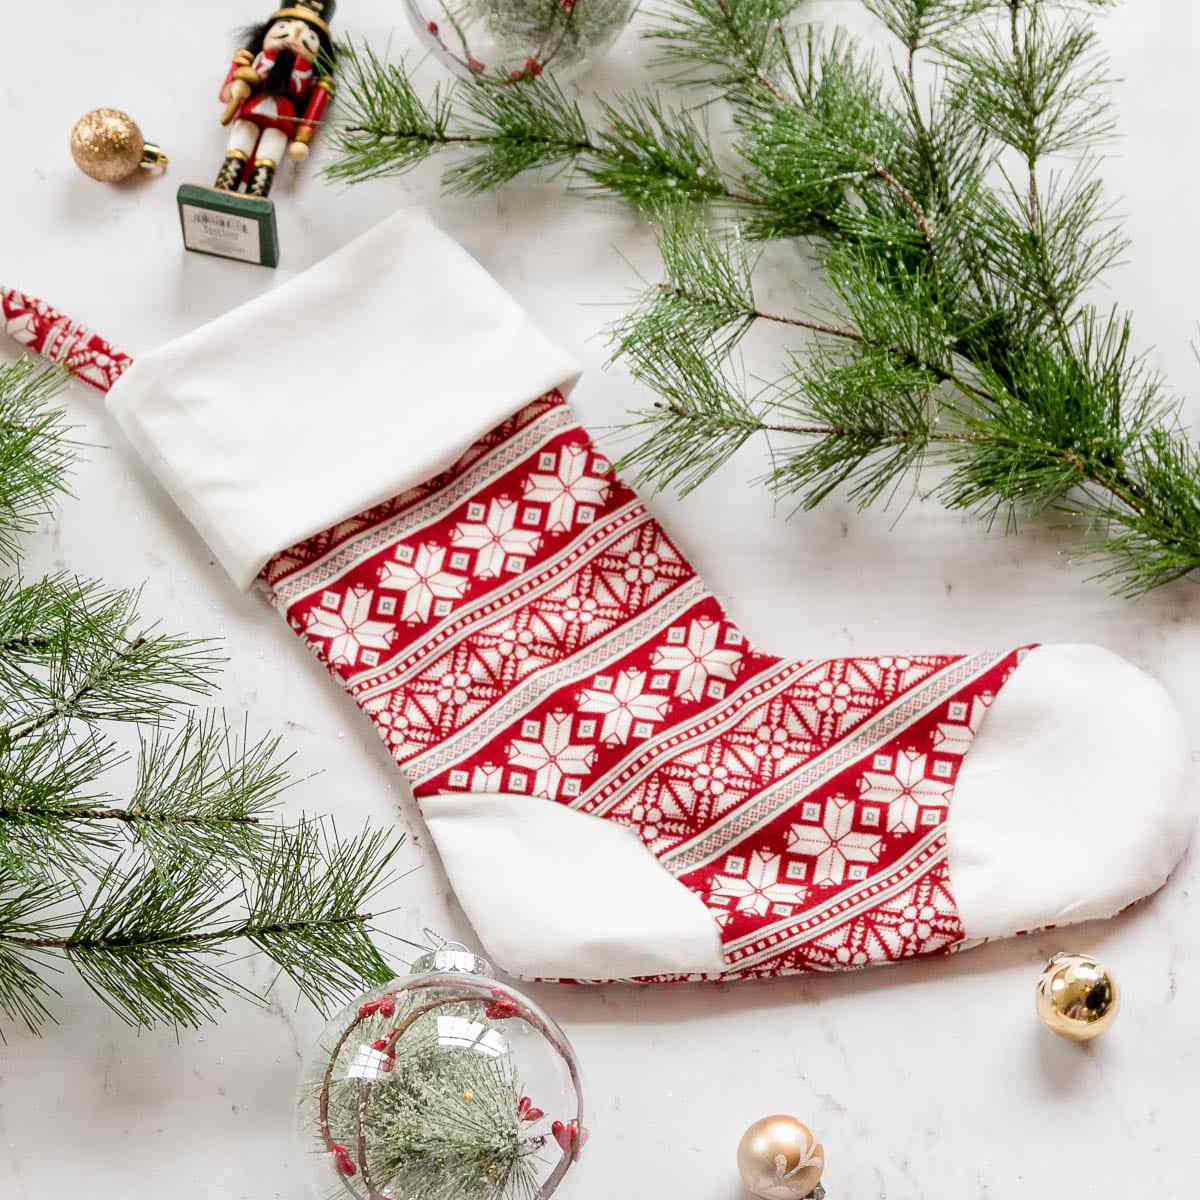 Christmas Stocking Sewing Pattern With Cuff, Heel, and Toe